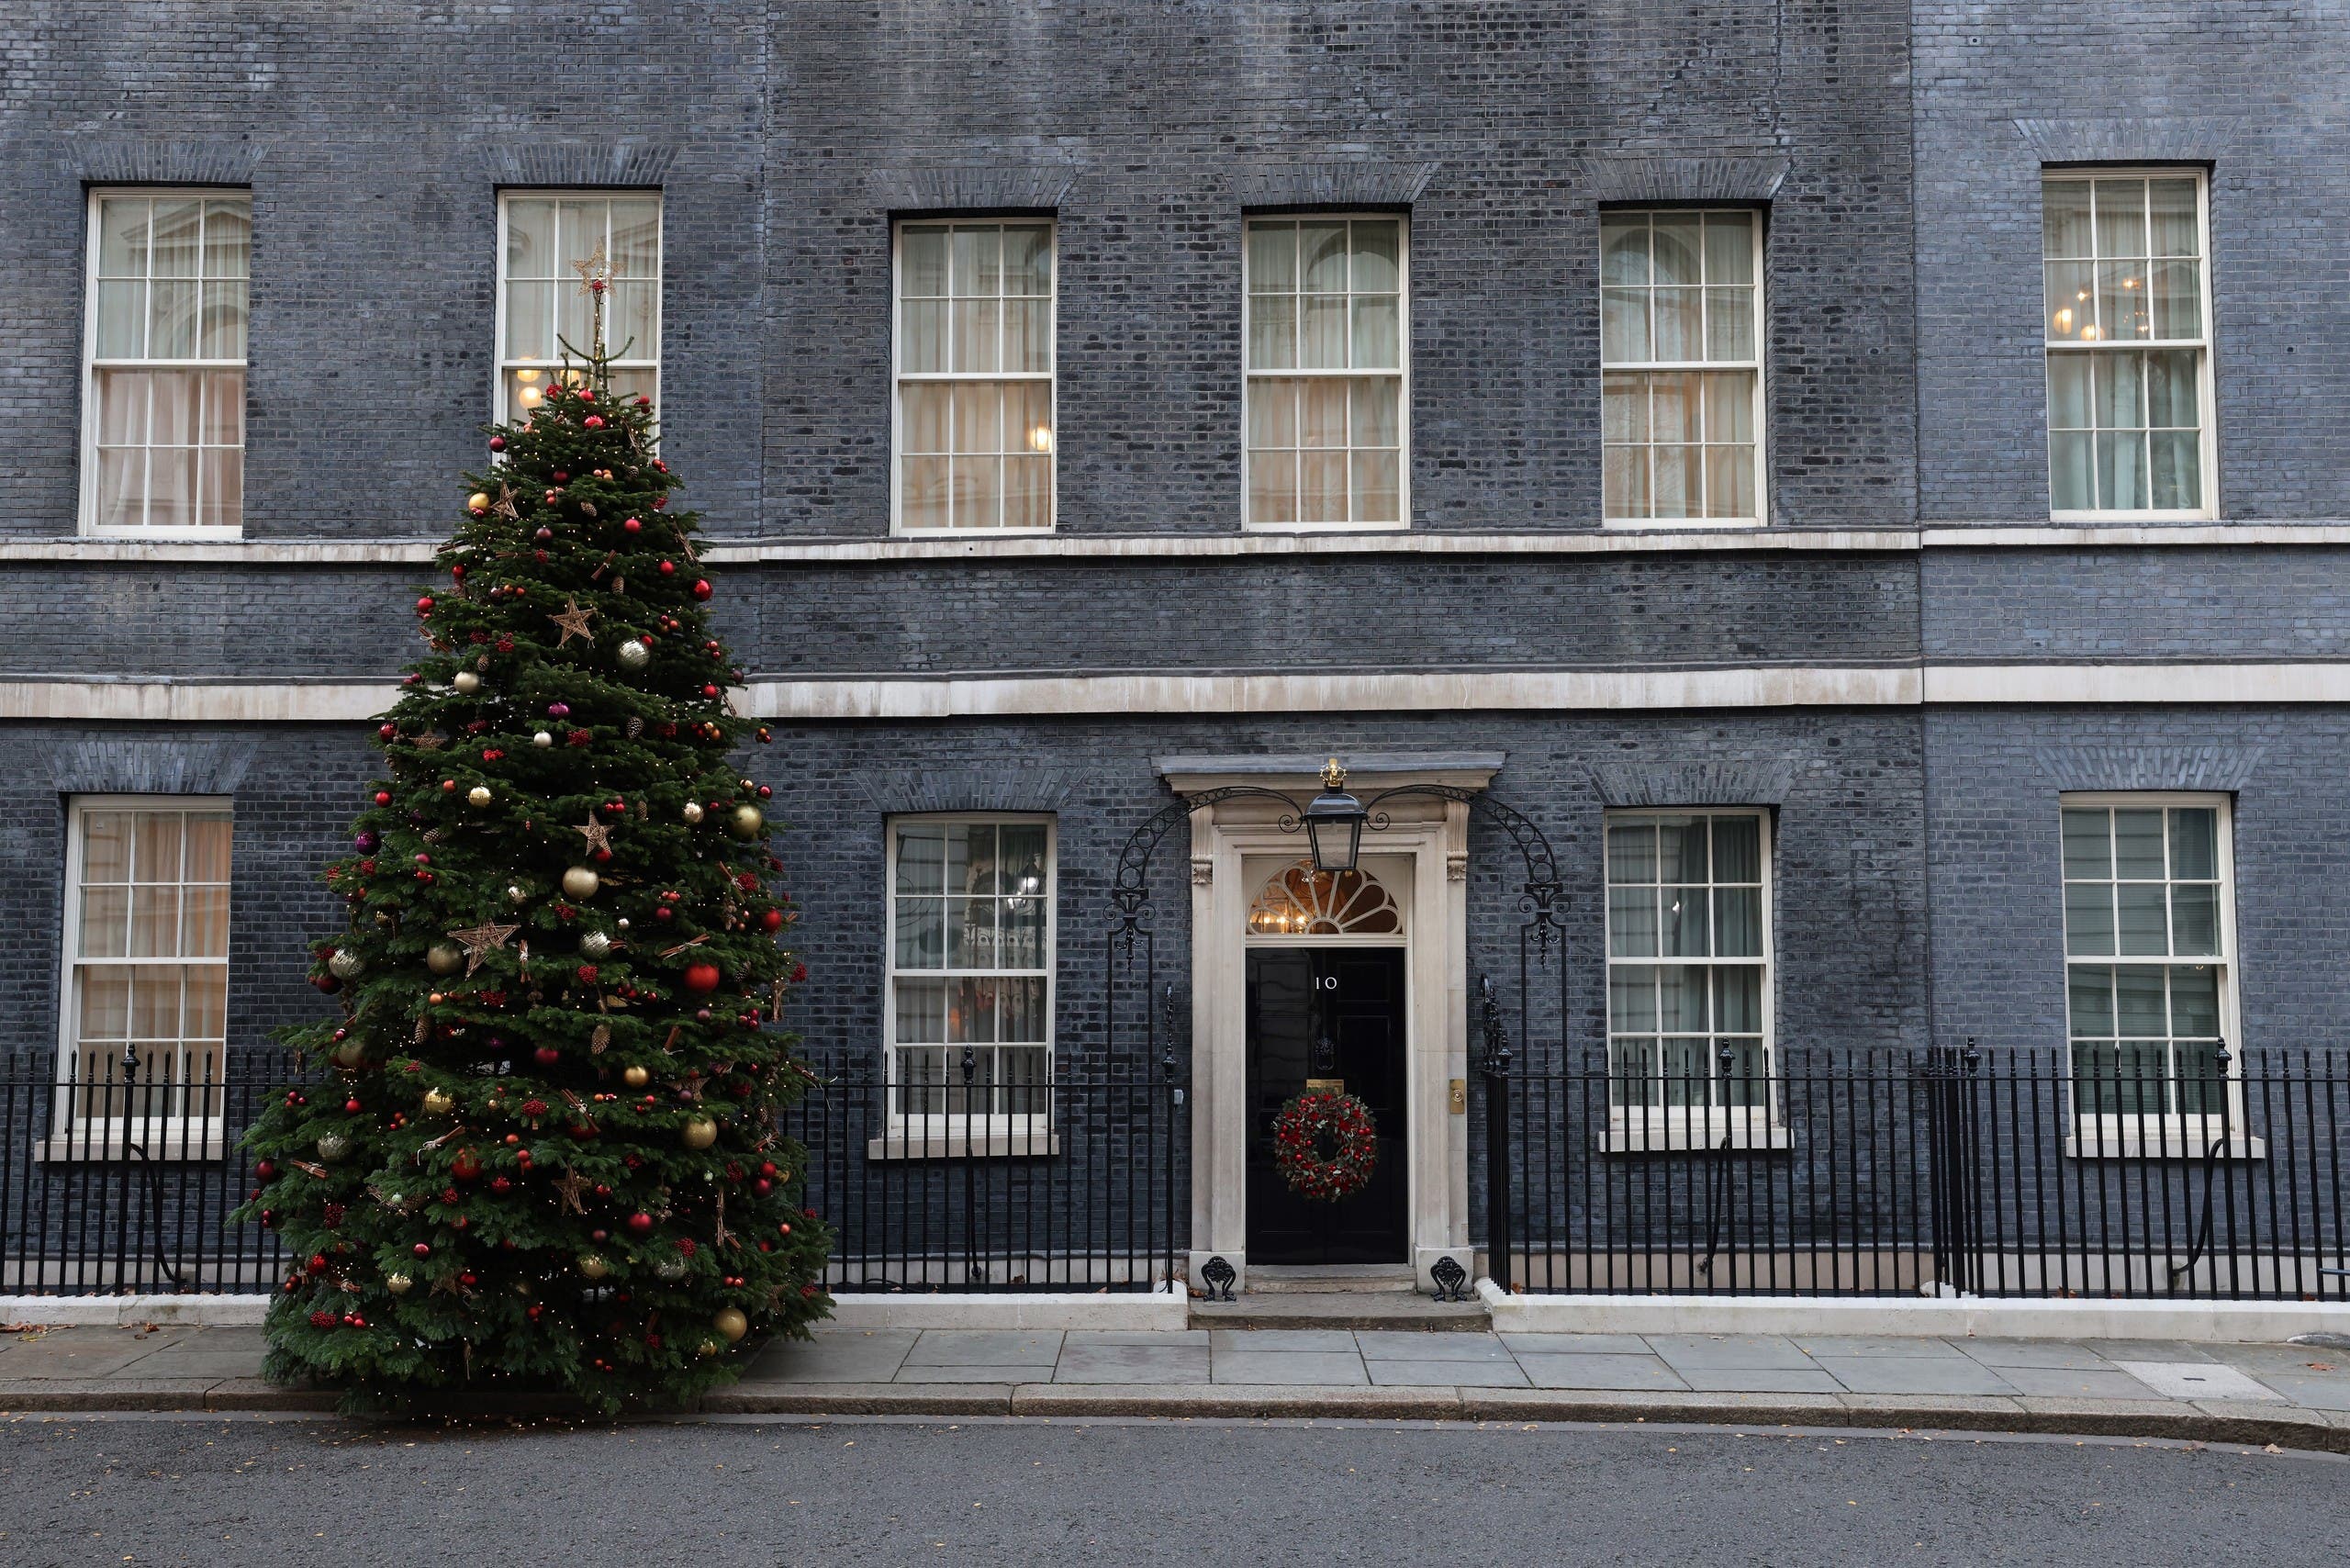 10 Downing Street, the seat of the British Prime Minister